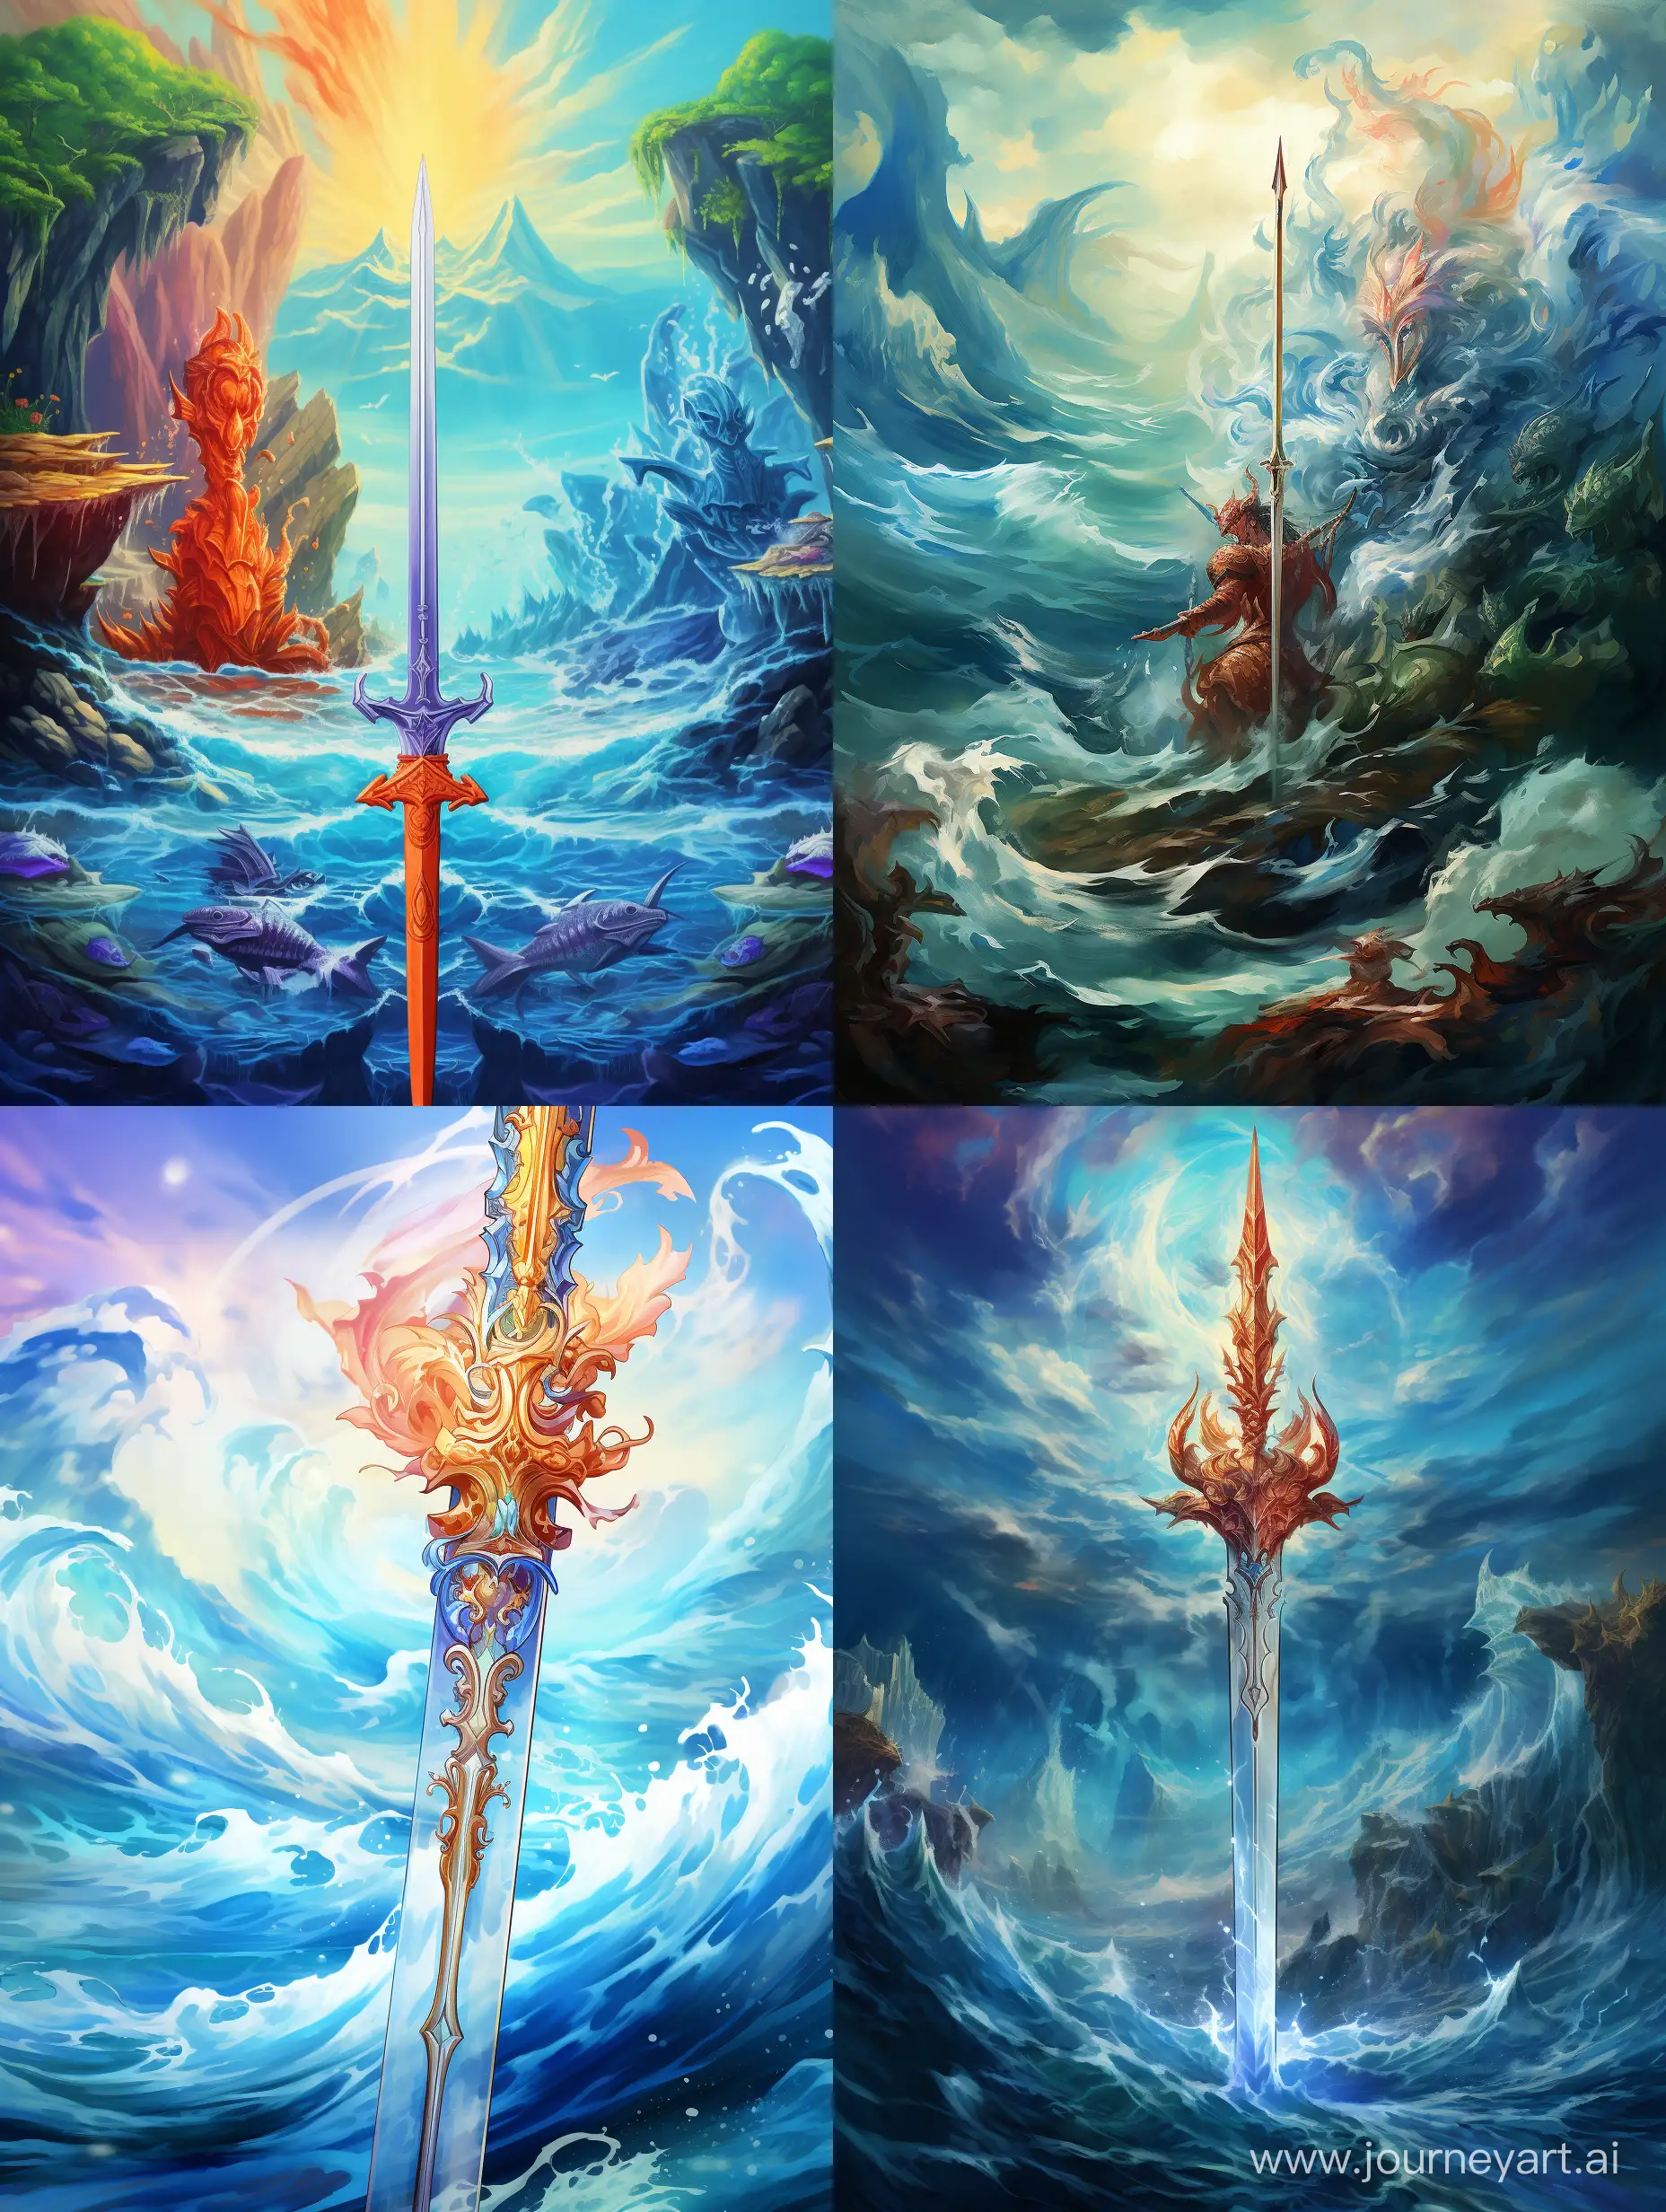 Oil paint, the lower part of the poster should be from the top of the sea water to the bottom of the sea, the upper part of the poster should be the sky, a big sword from the middle of the upper part of the poster to the middle of the lower part of the poster, the color of the sea water is crimson, the color of the sword handle is brown.